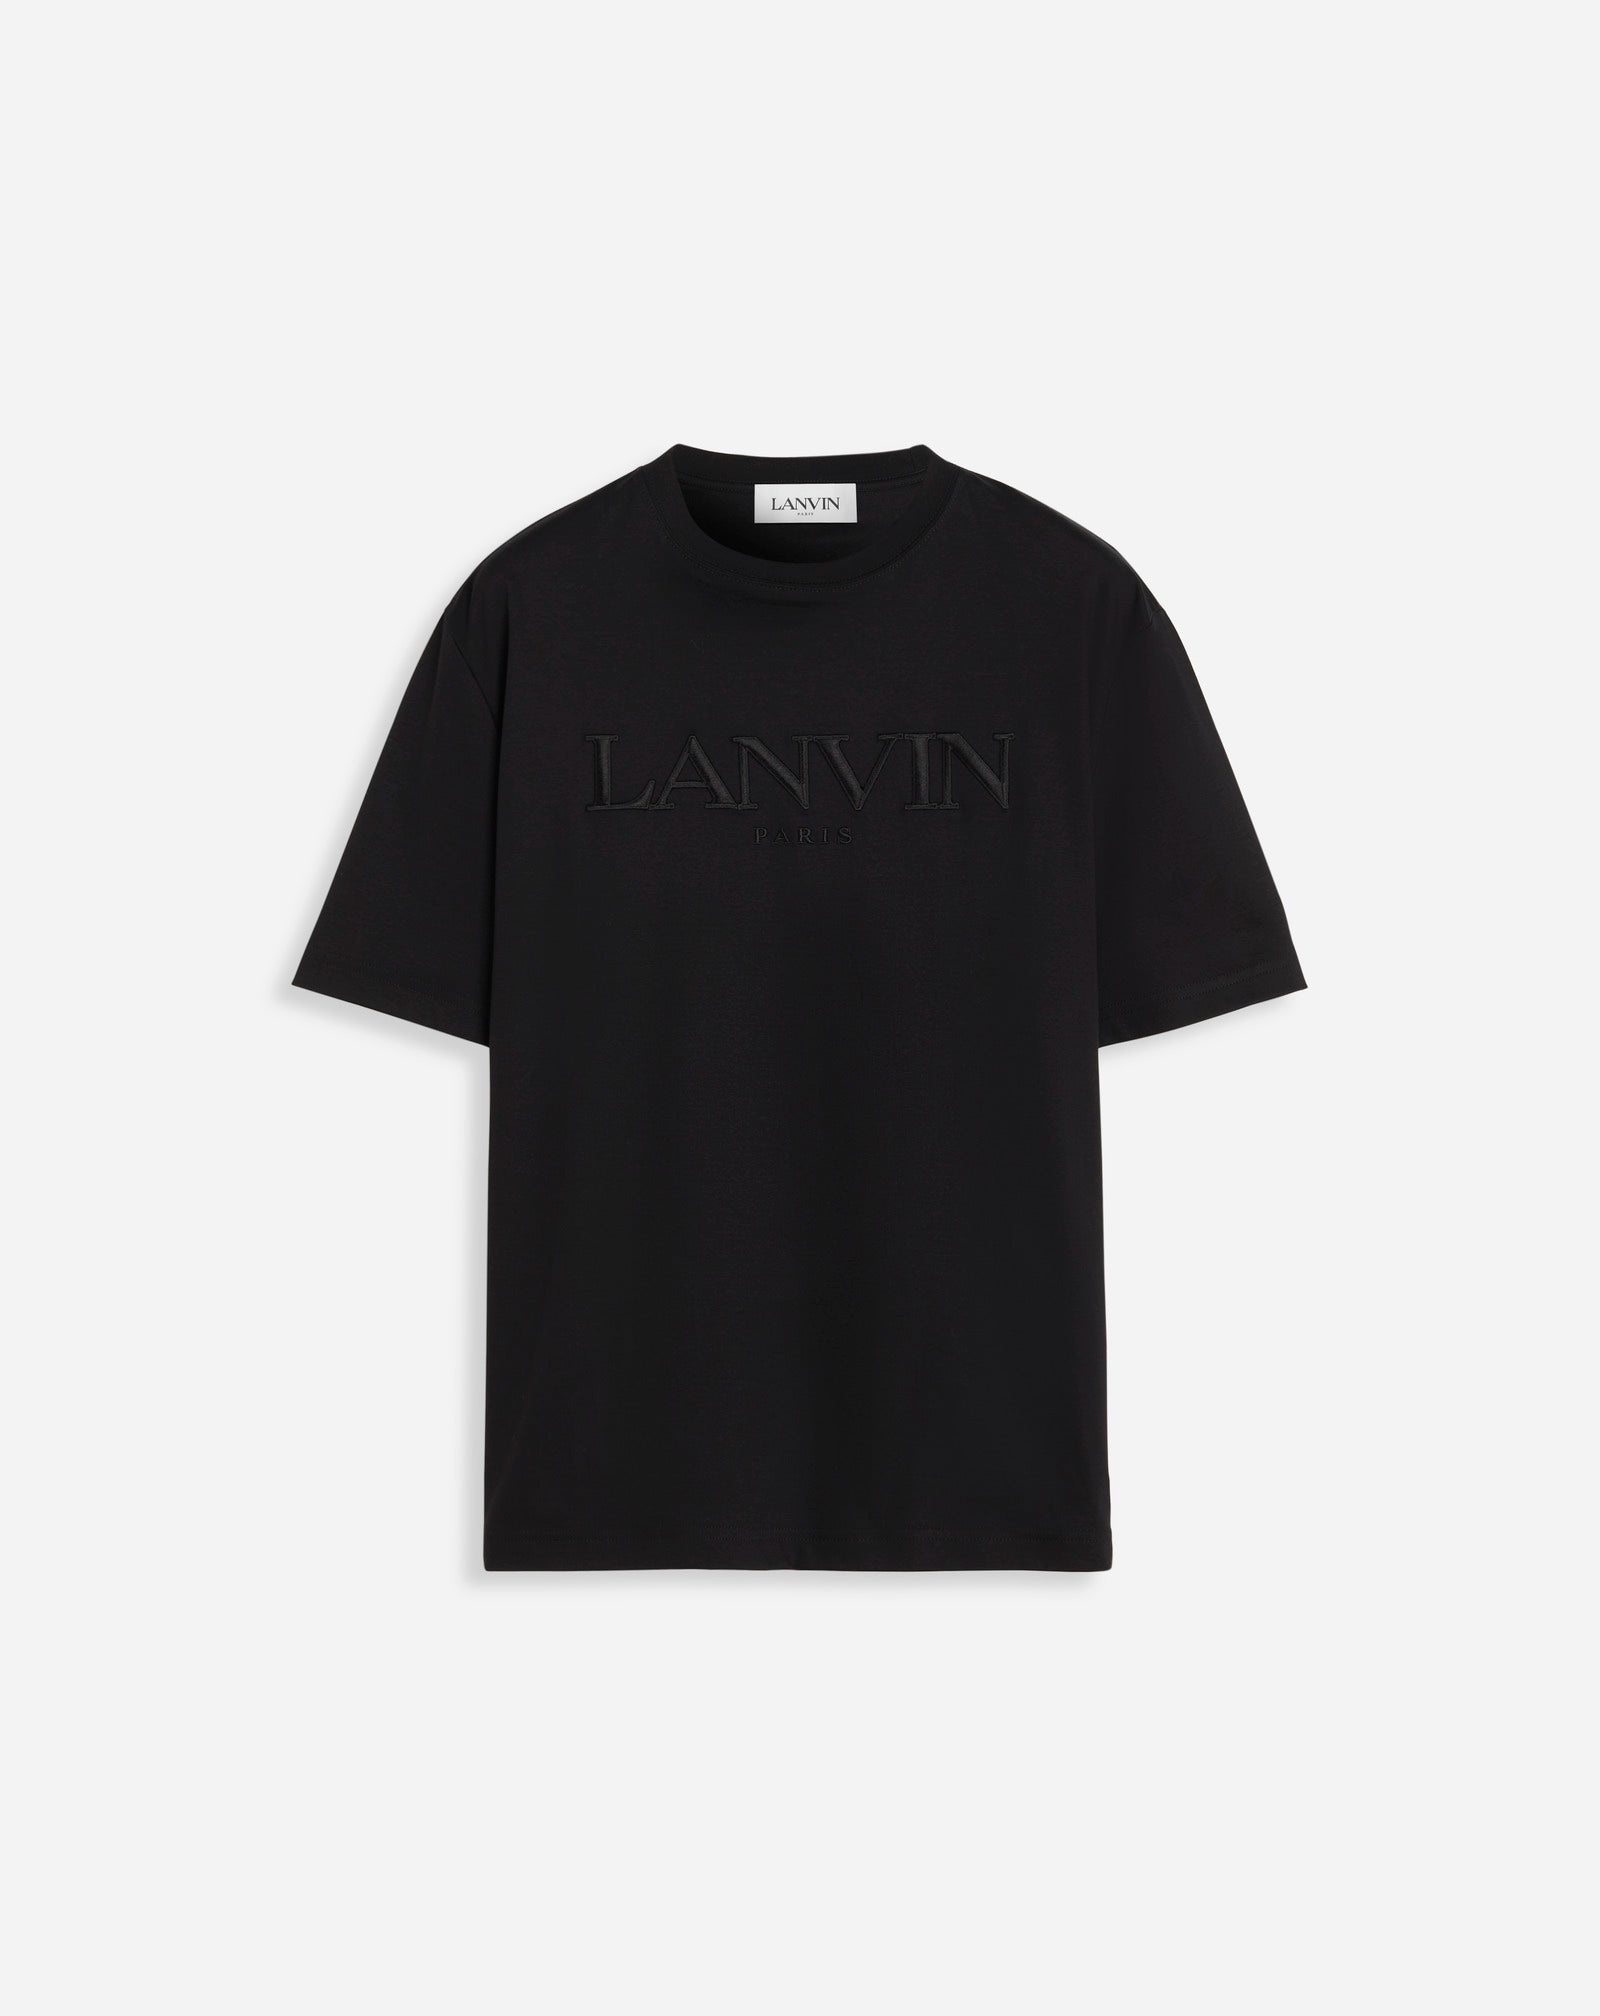 LANVIN EMBROIDERED T-SHIRT - 1